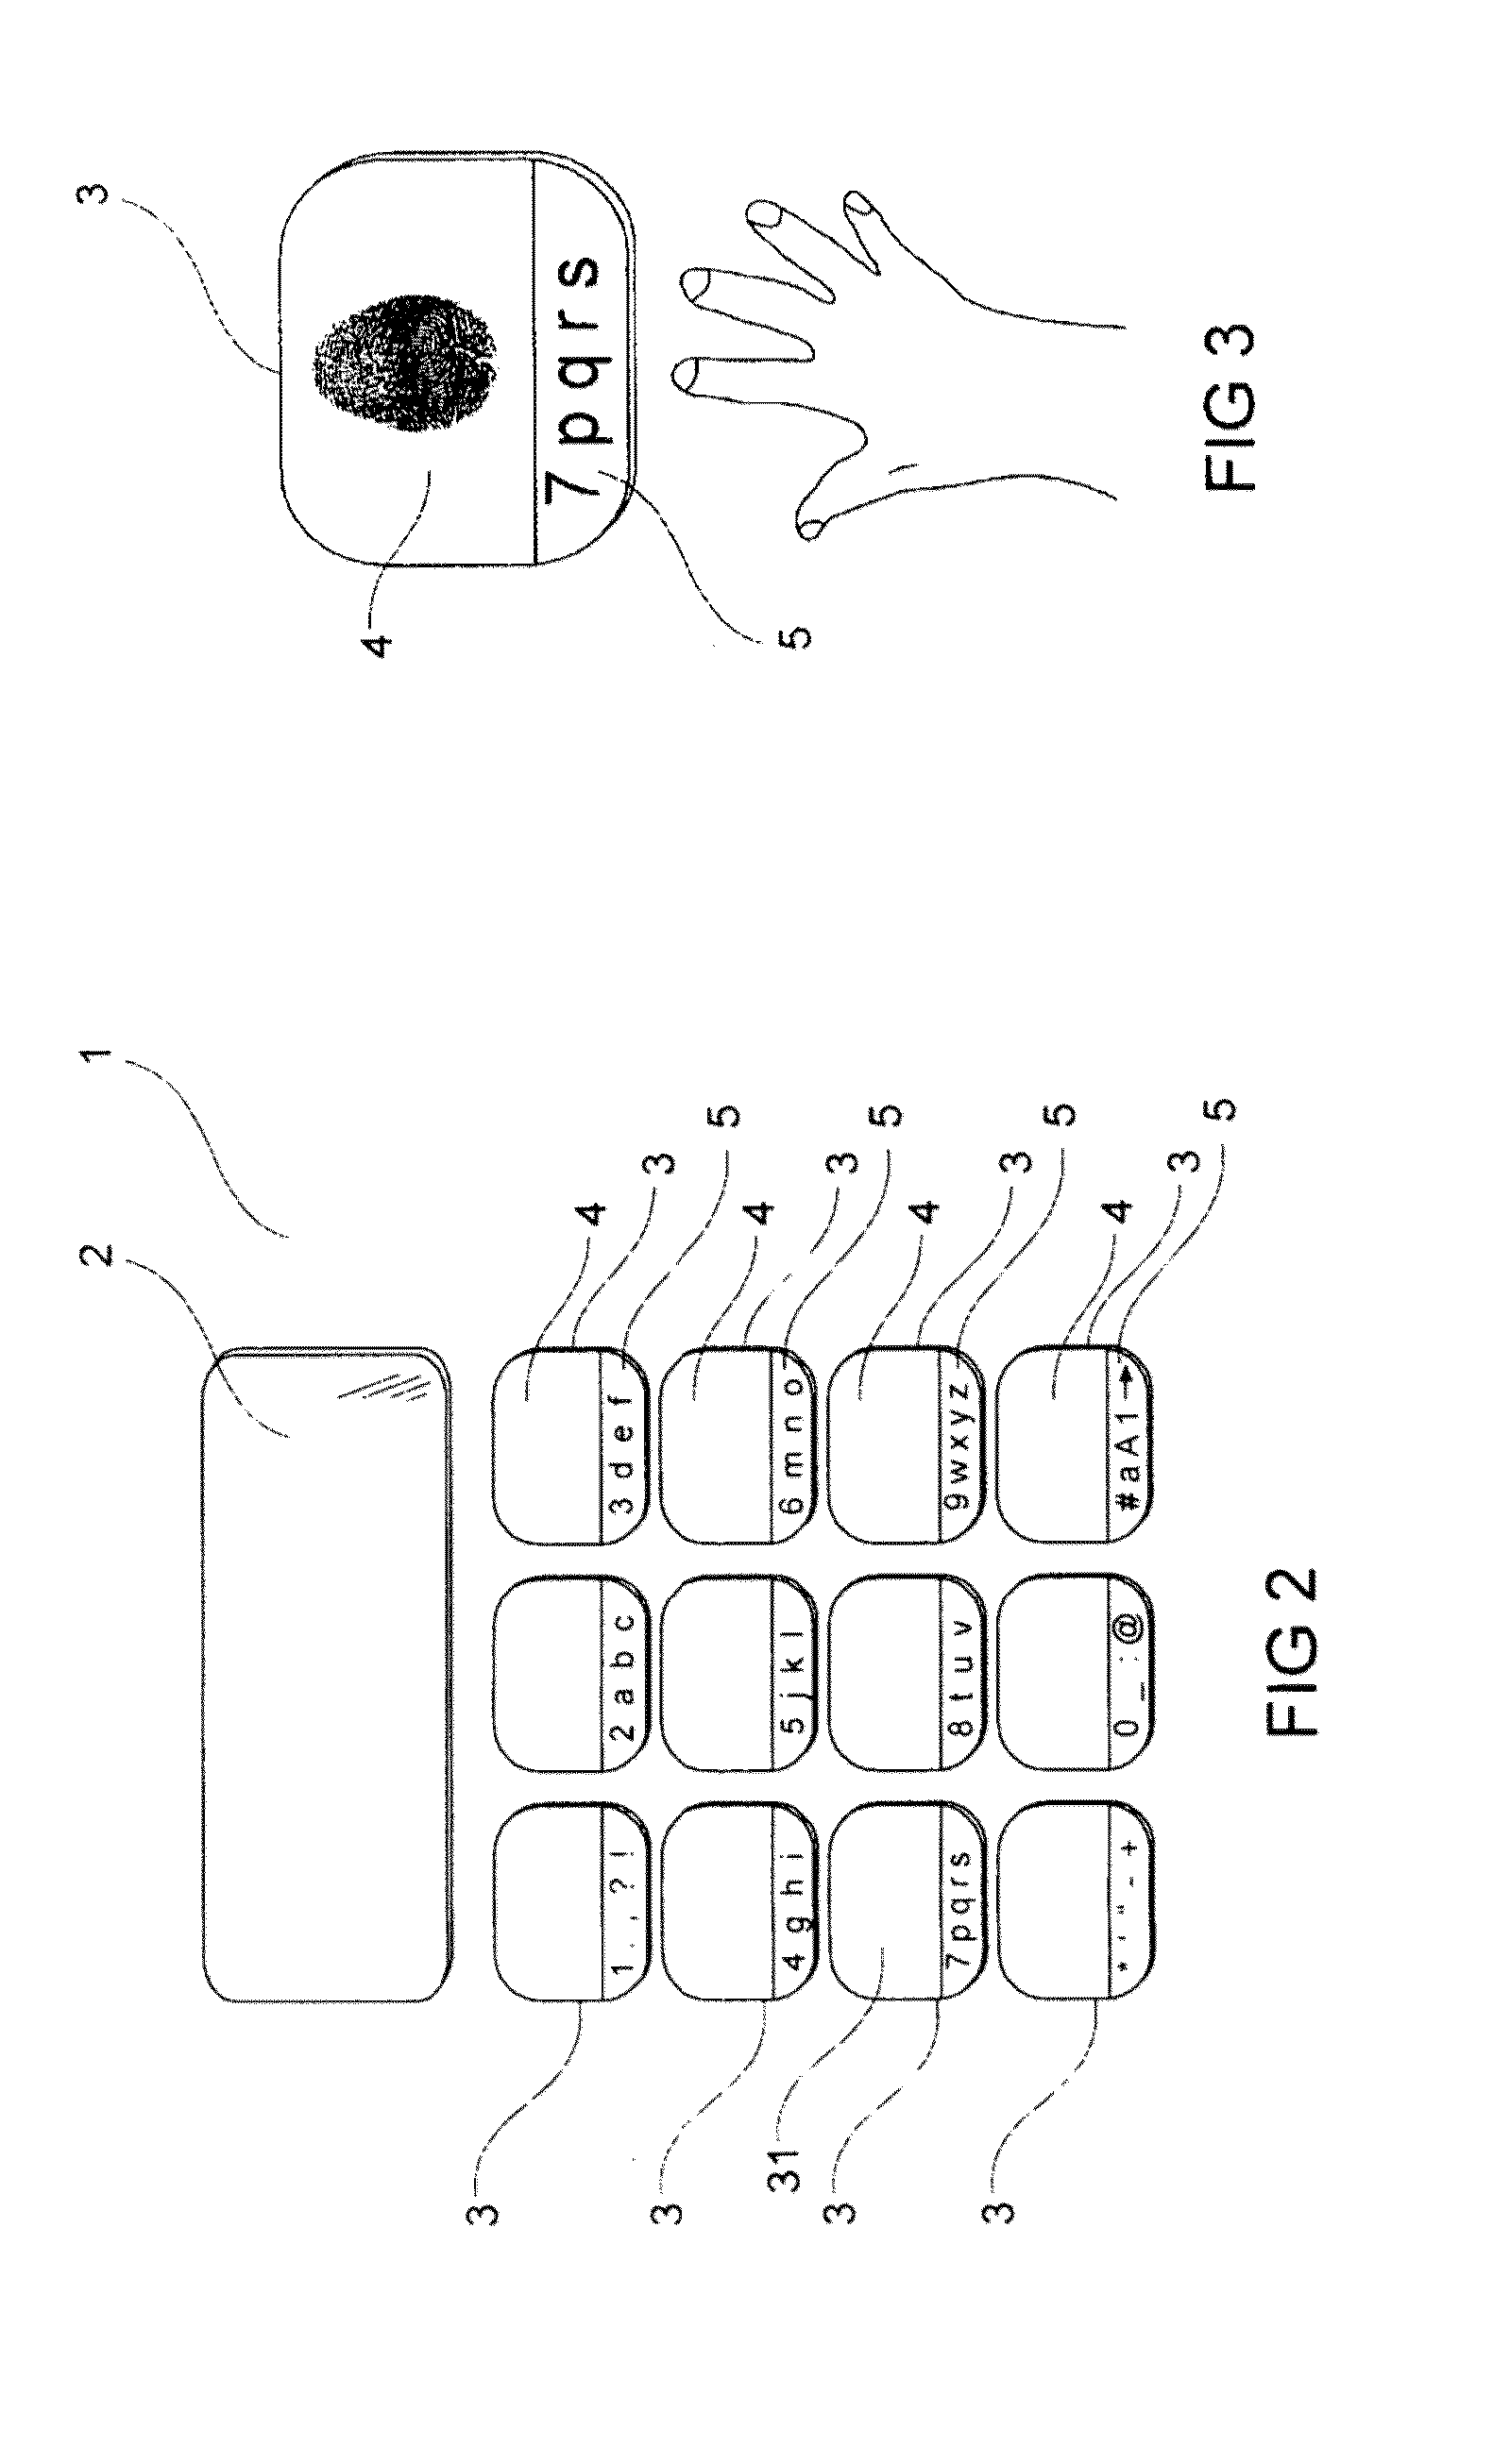 Method and system for operating a keyboard with multi functional keys, using fingerprints recognition